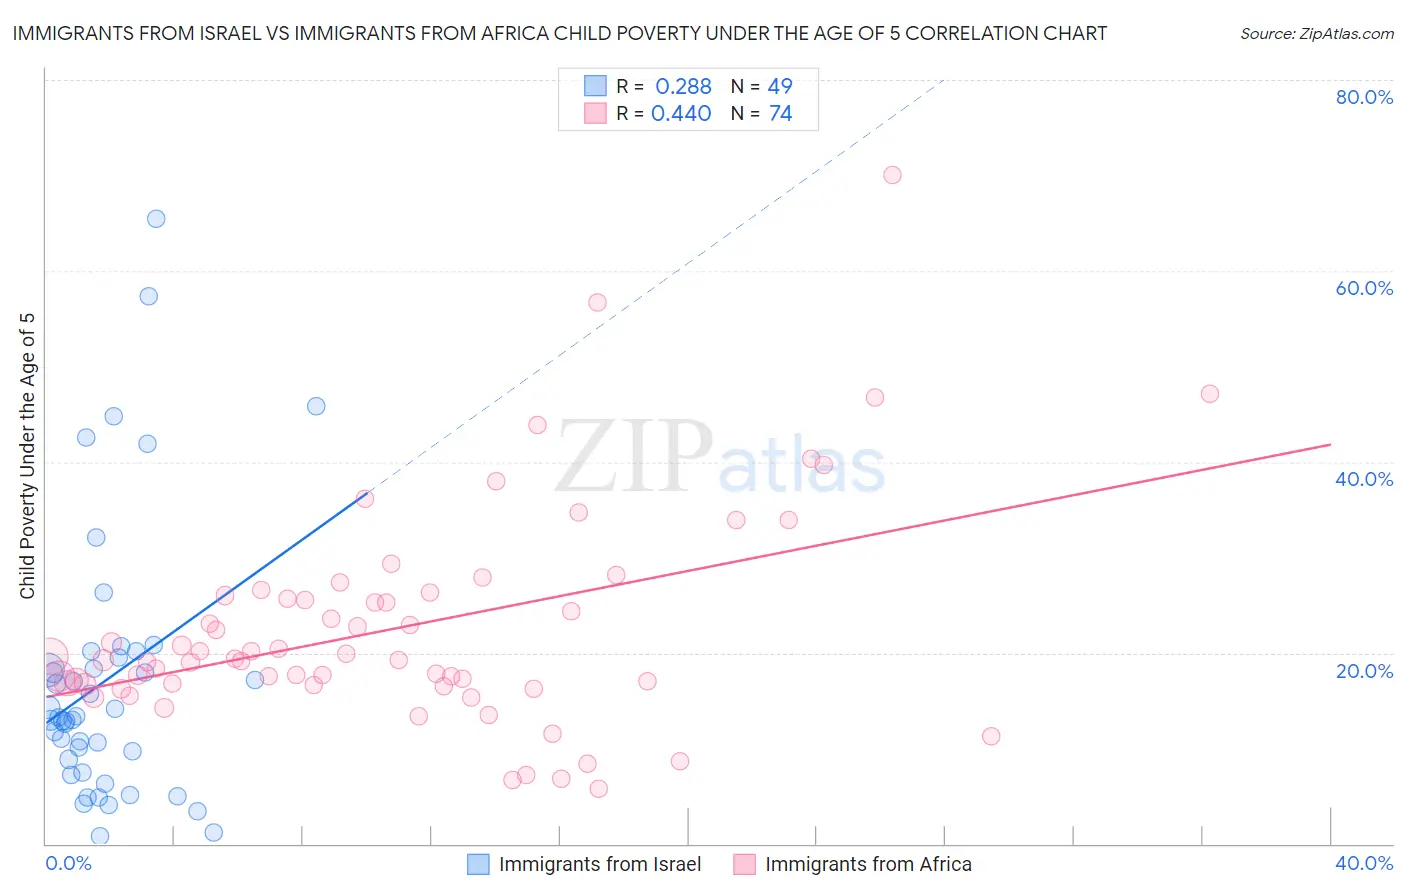 Immigrants from Israel vs Immigrants from Africa Child Poverty Under the Age of 5